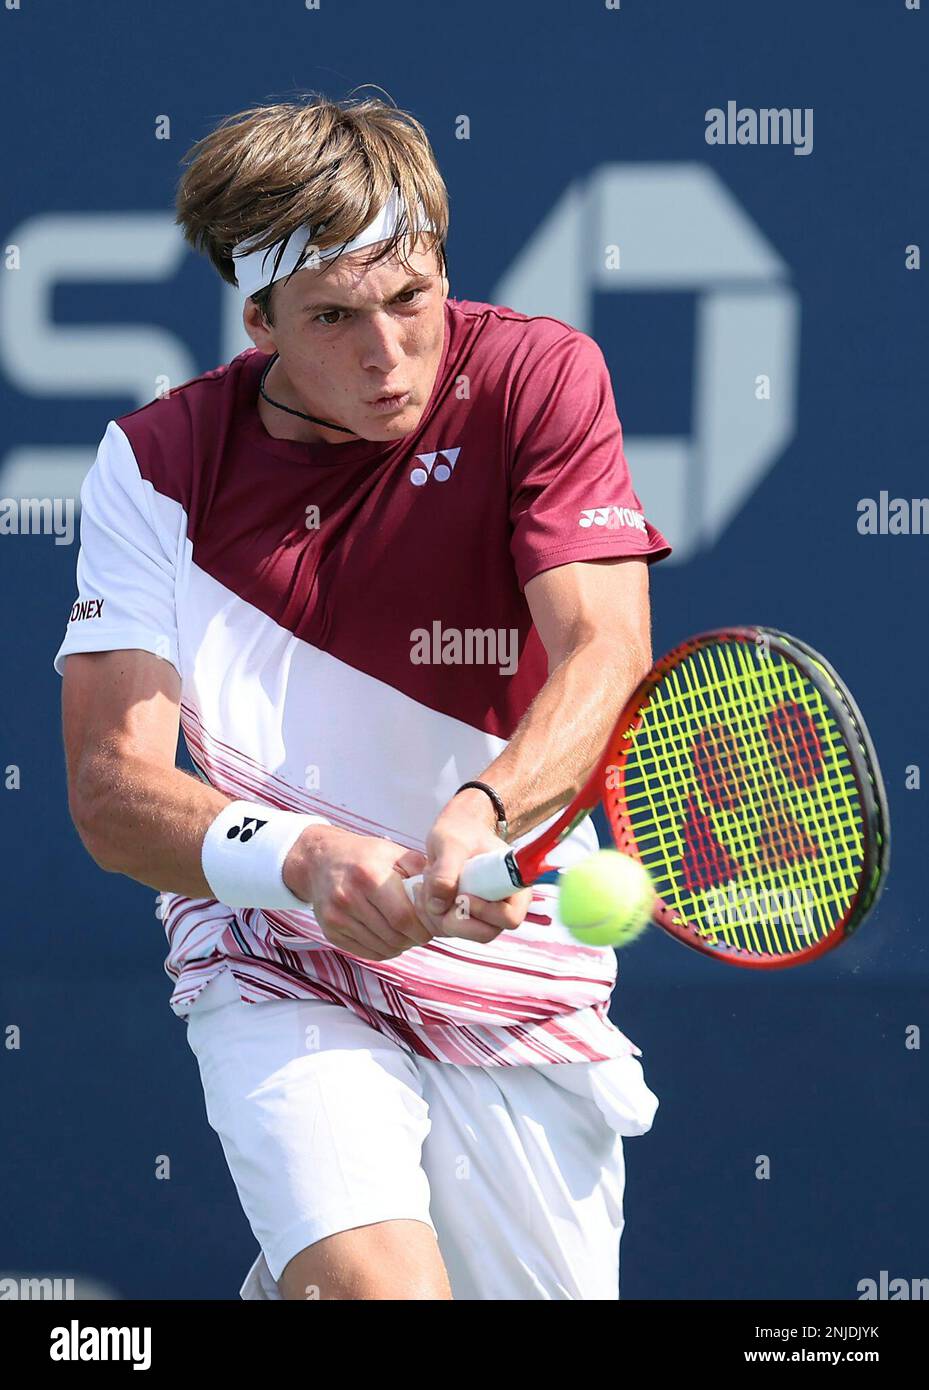 Lautaro Midon returns during a junior boys singles match at the 2022 US Open, Monday, Sep